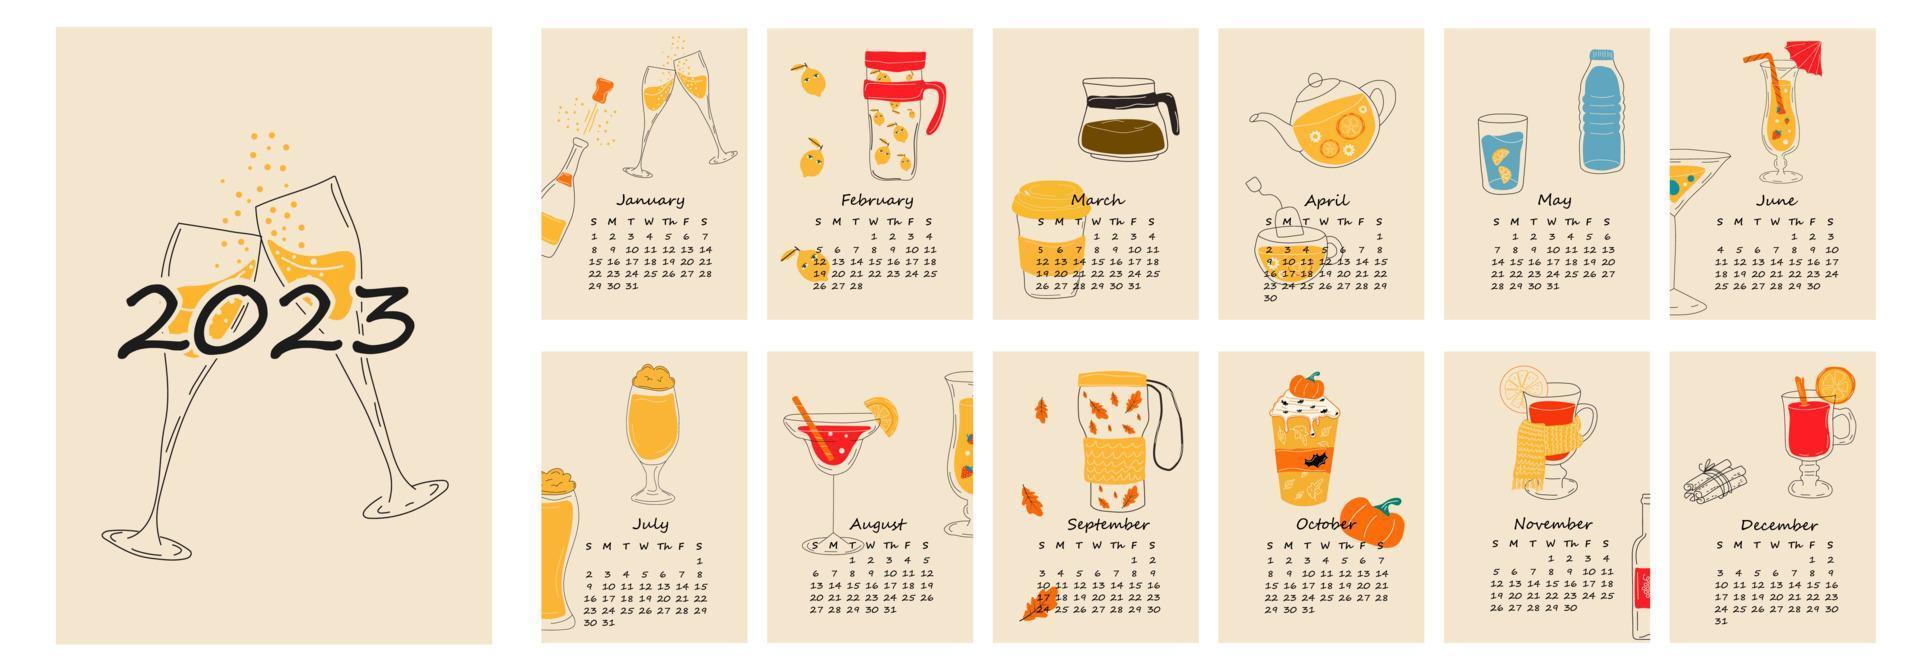 2023 calendar design with different drinks for different seasons. Hand drawn calendar planner minimal style, annual organizer. Vector illustration.